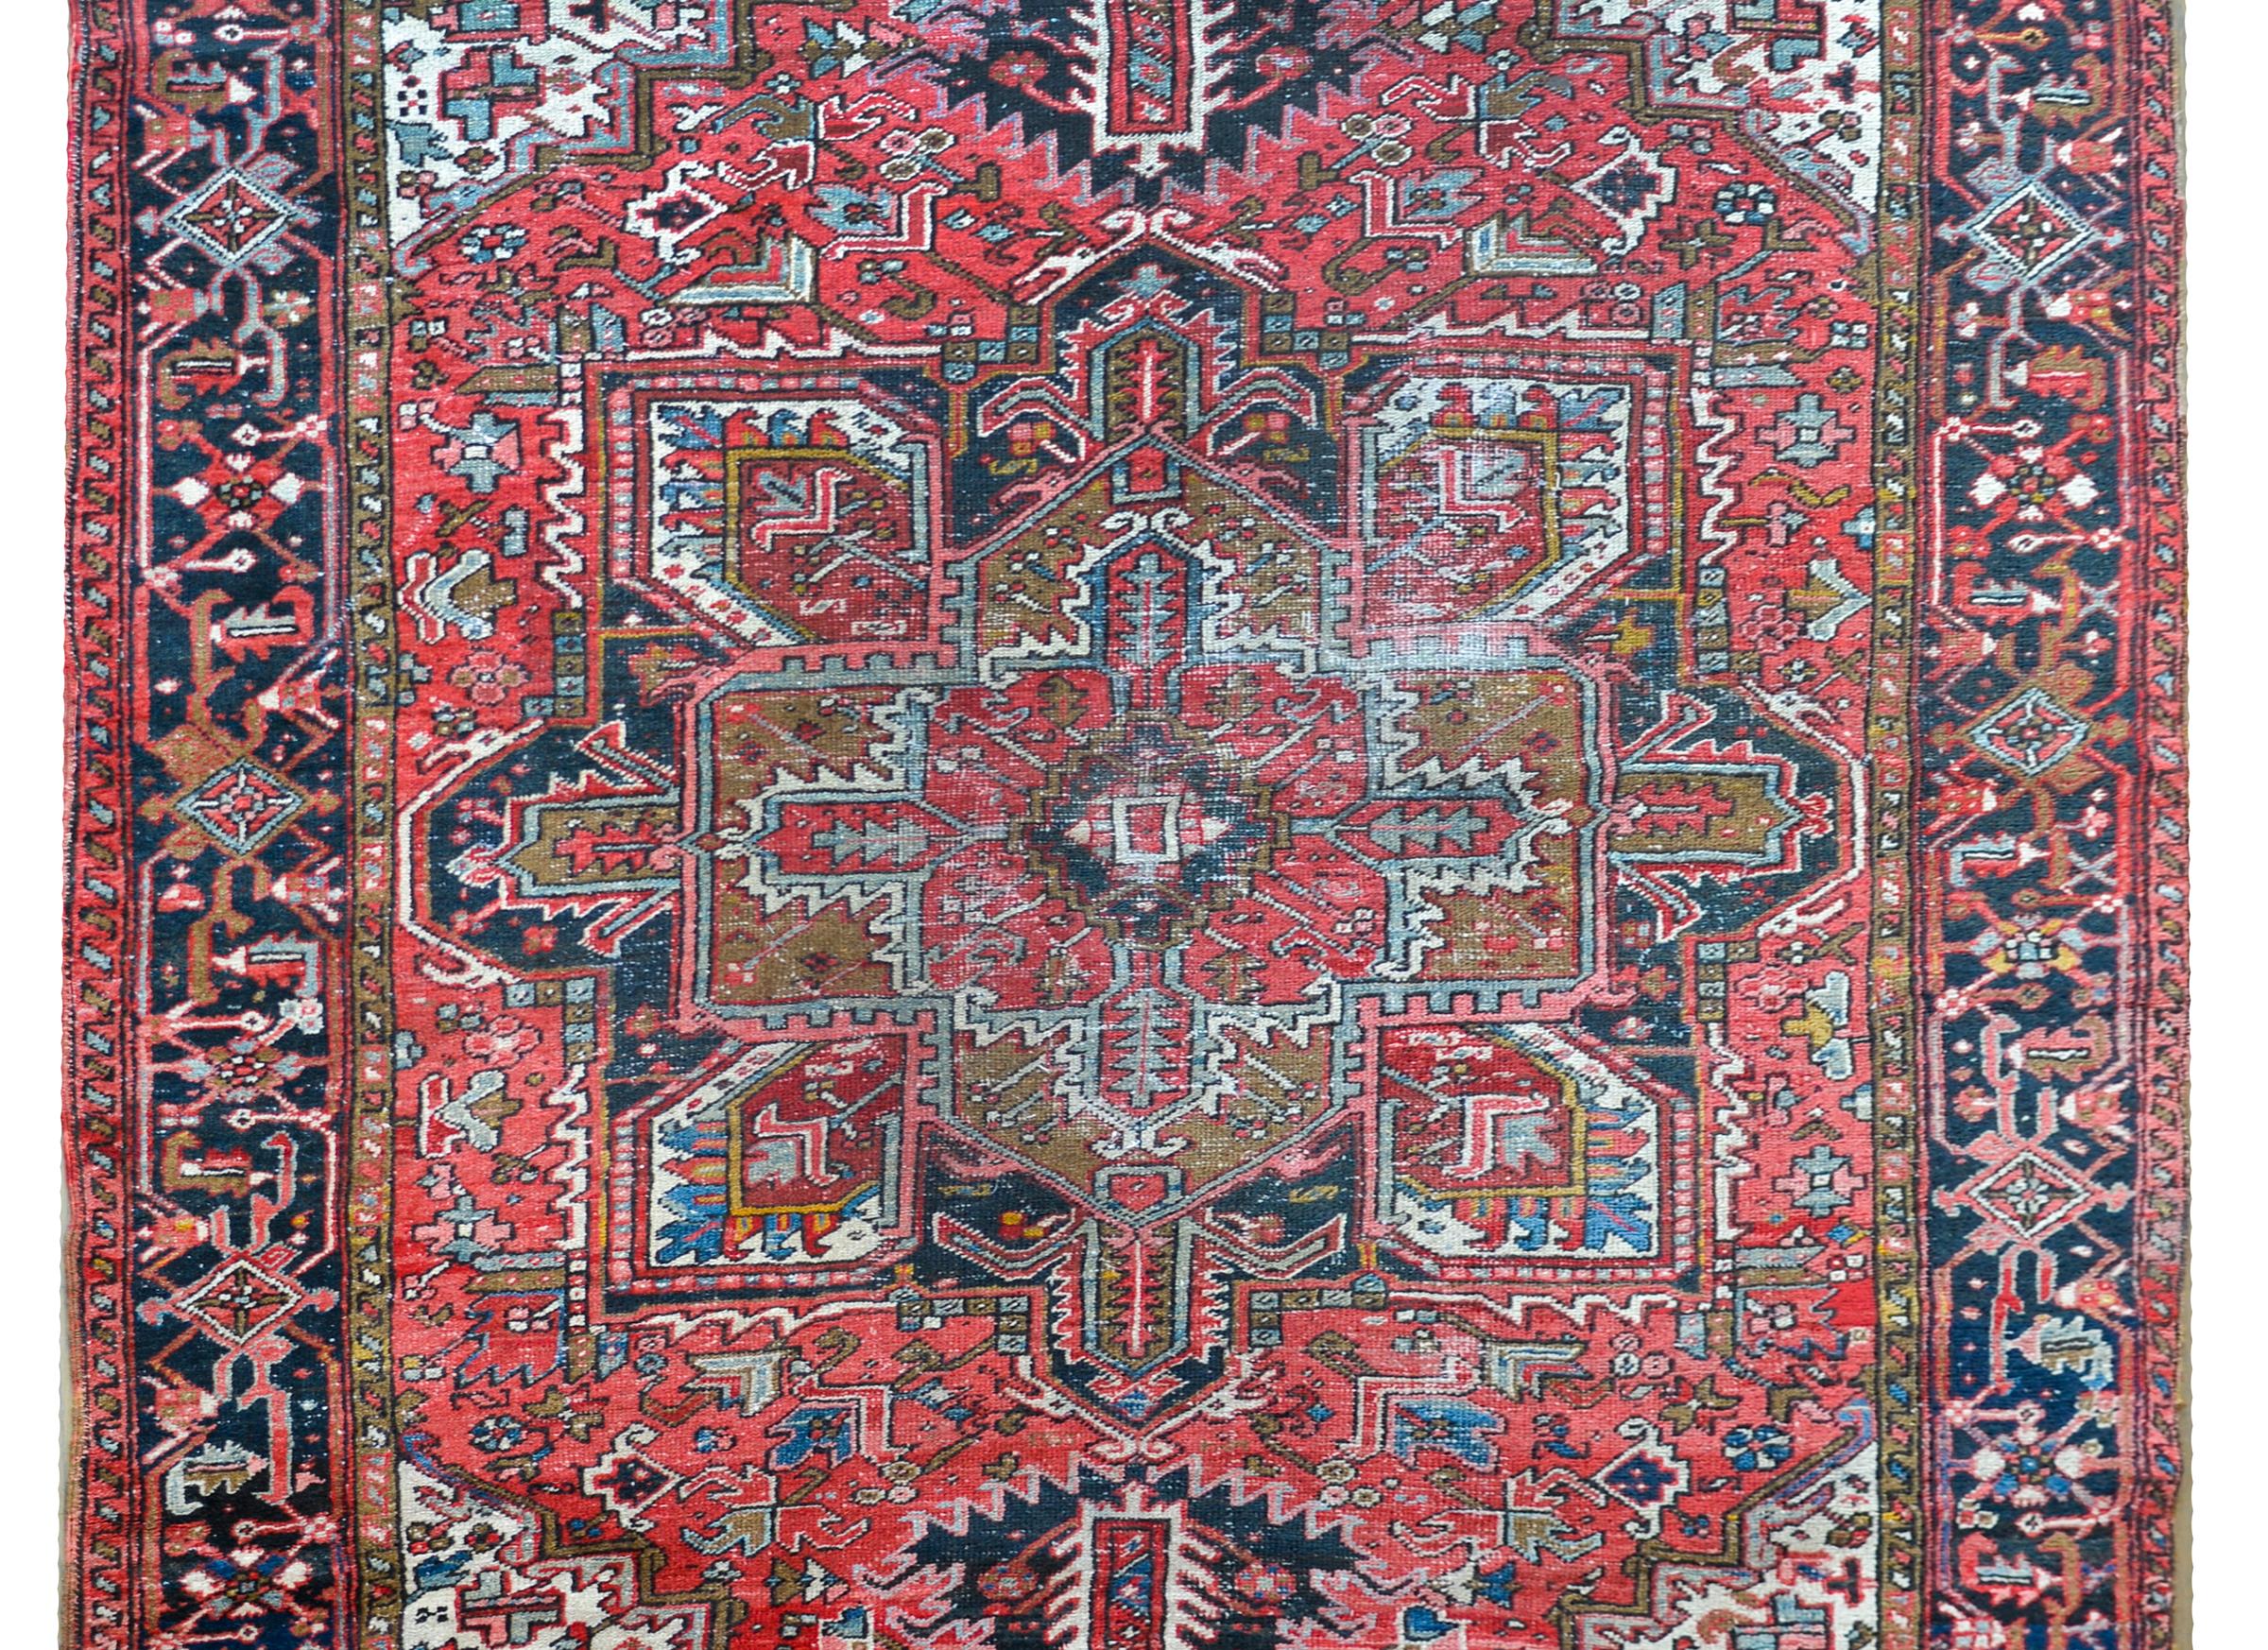 A wonderful early 20th century Persian Heriz rug with a traditional central large-scale floral patterned medallion amidst a field of more stylized flowers all woven in myriad colors including indigo, crimson, brown, and pink, and all surrounded by a